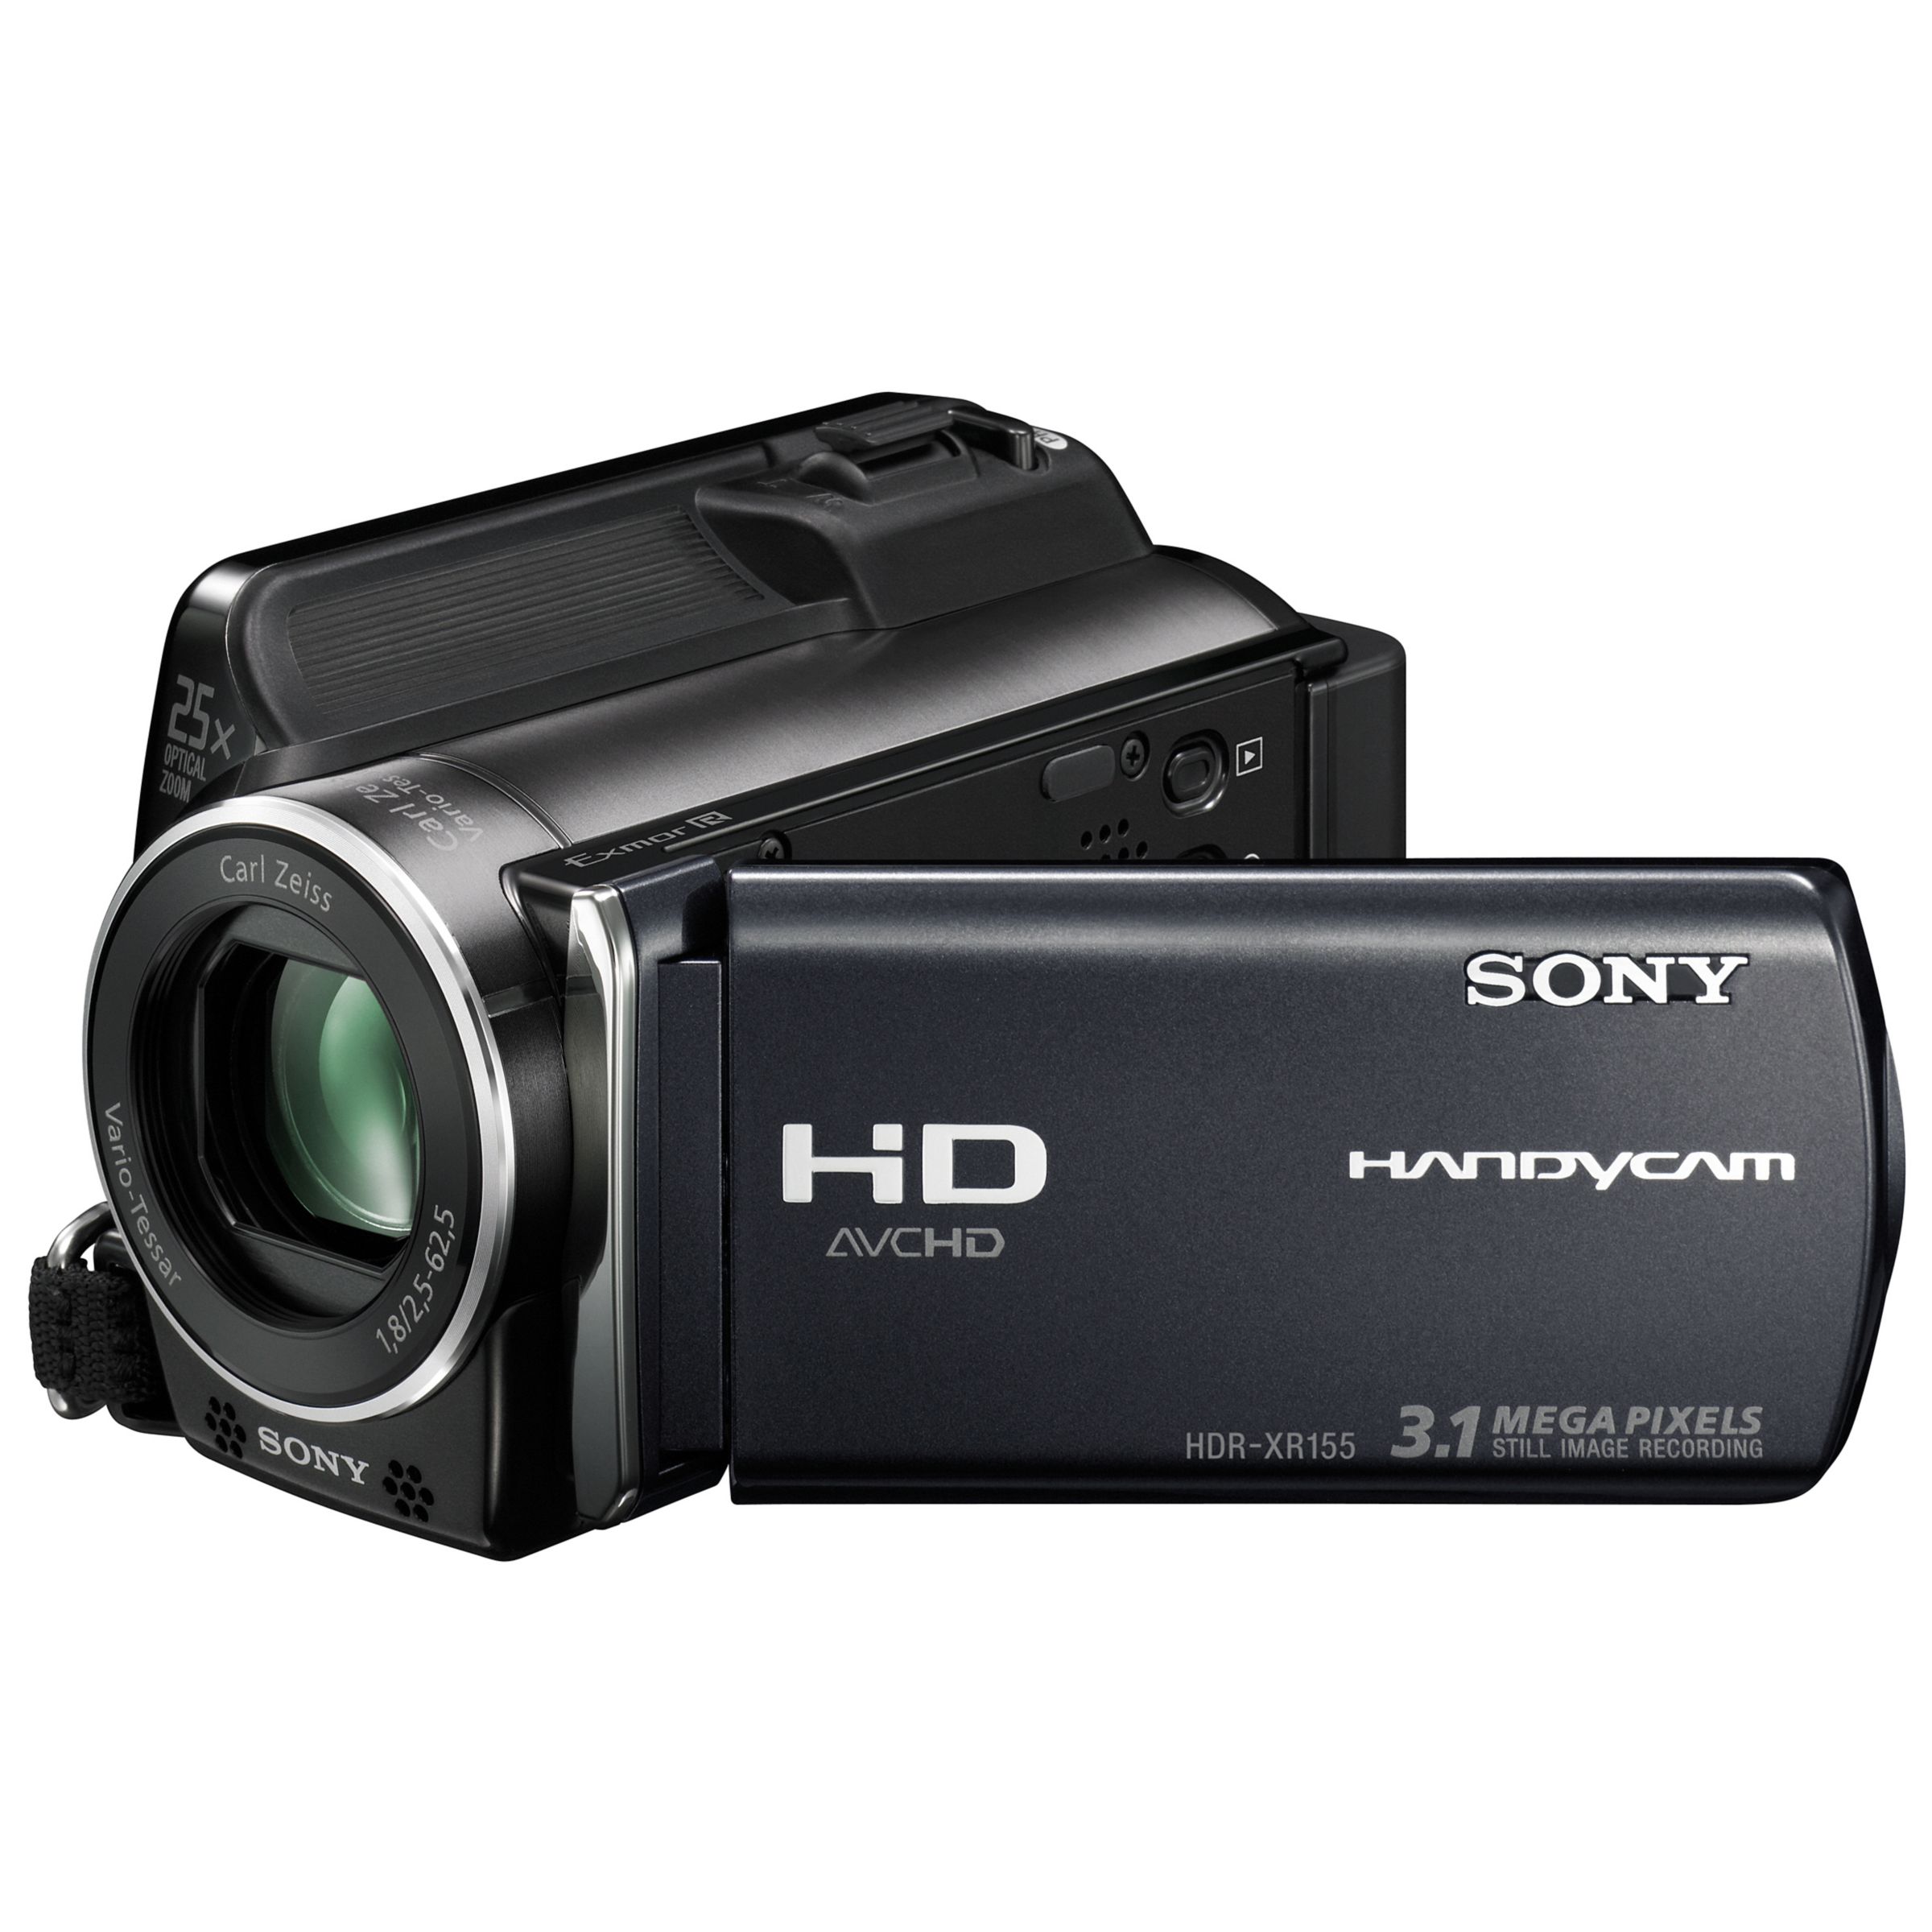 Sony HDR-XR155E High Definition 120GB Hard Drive/Memory Card Camcorder, Black at JohnLewis